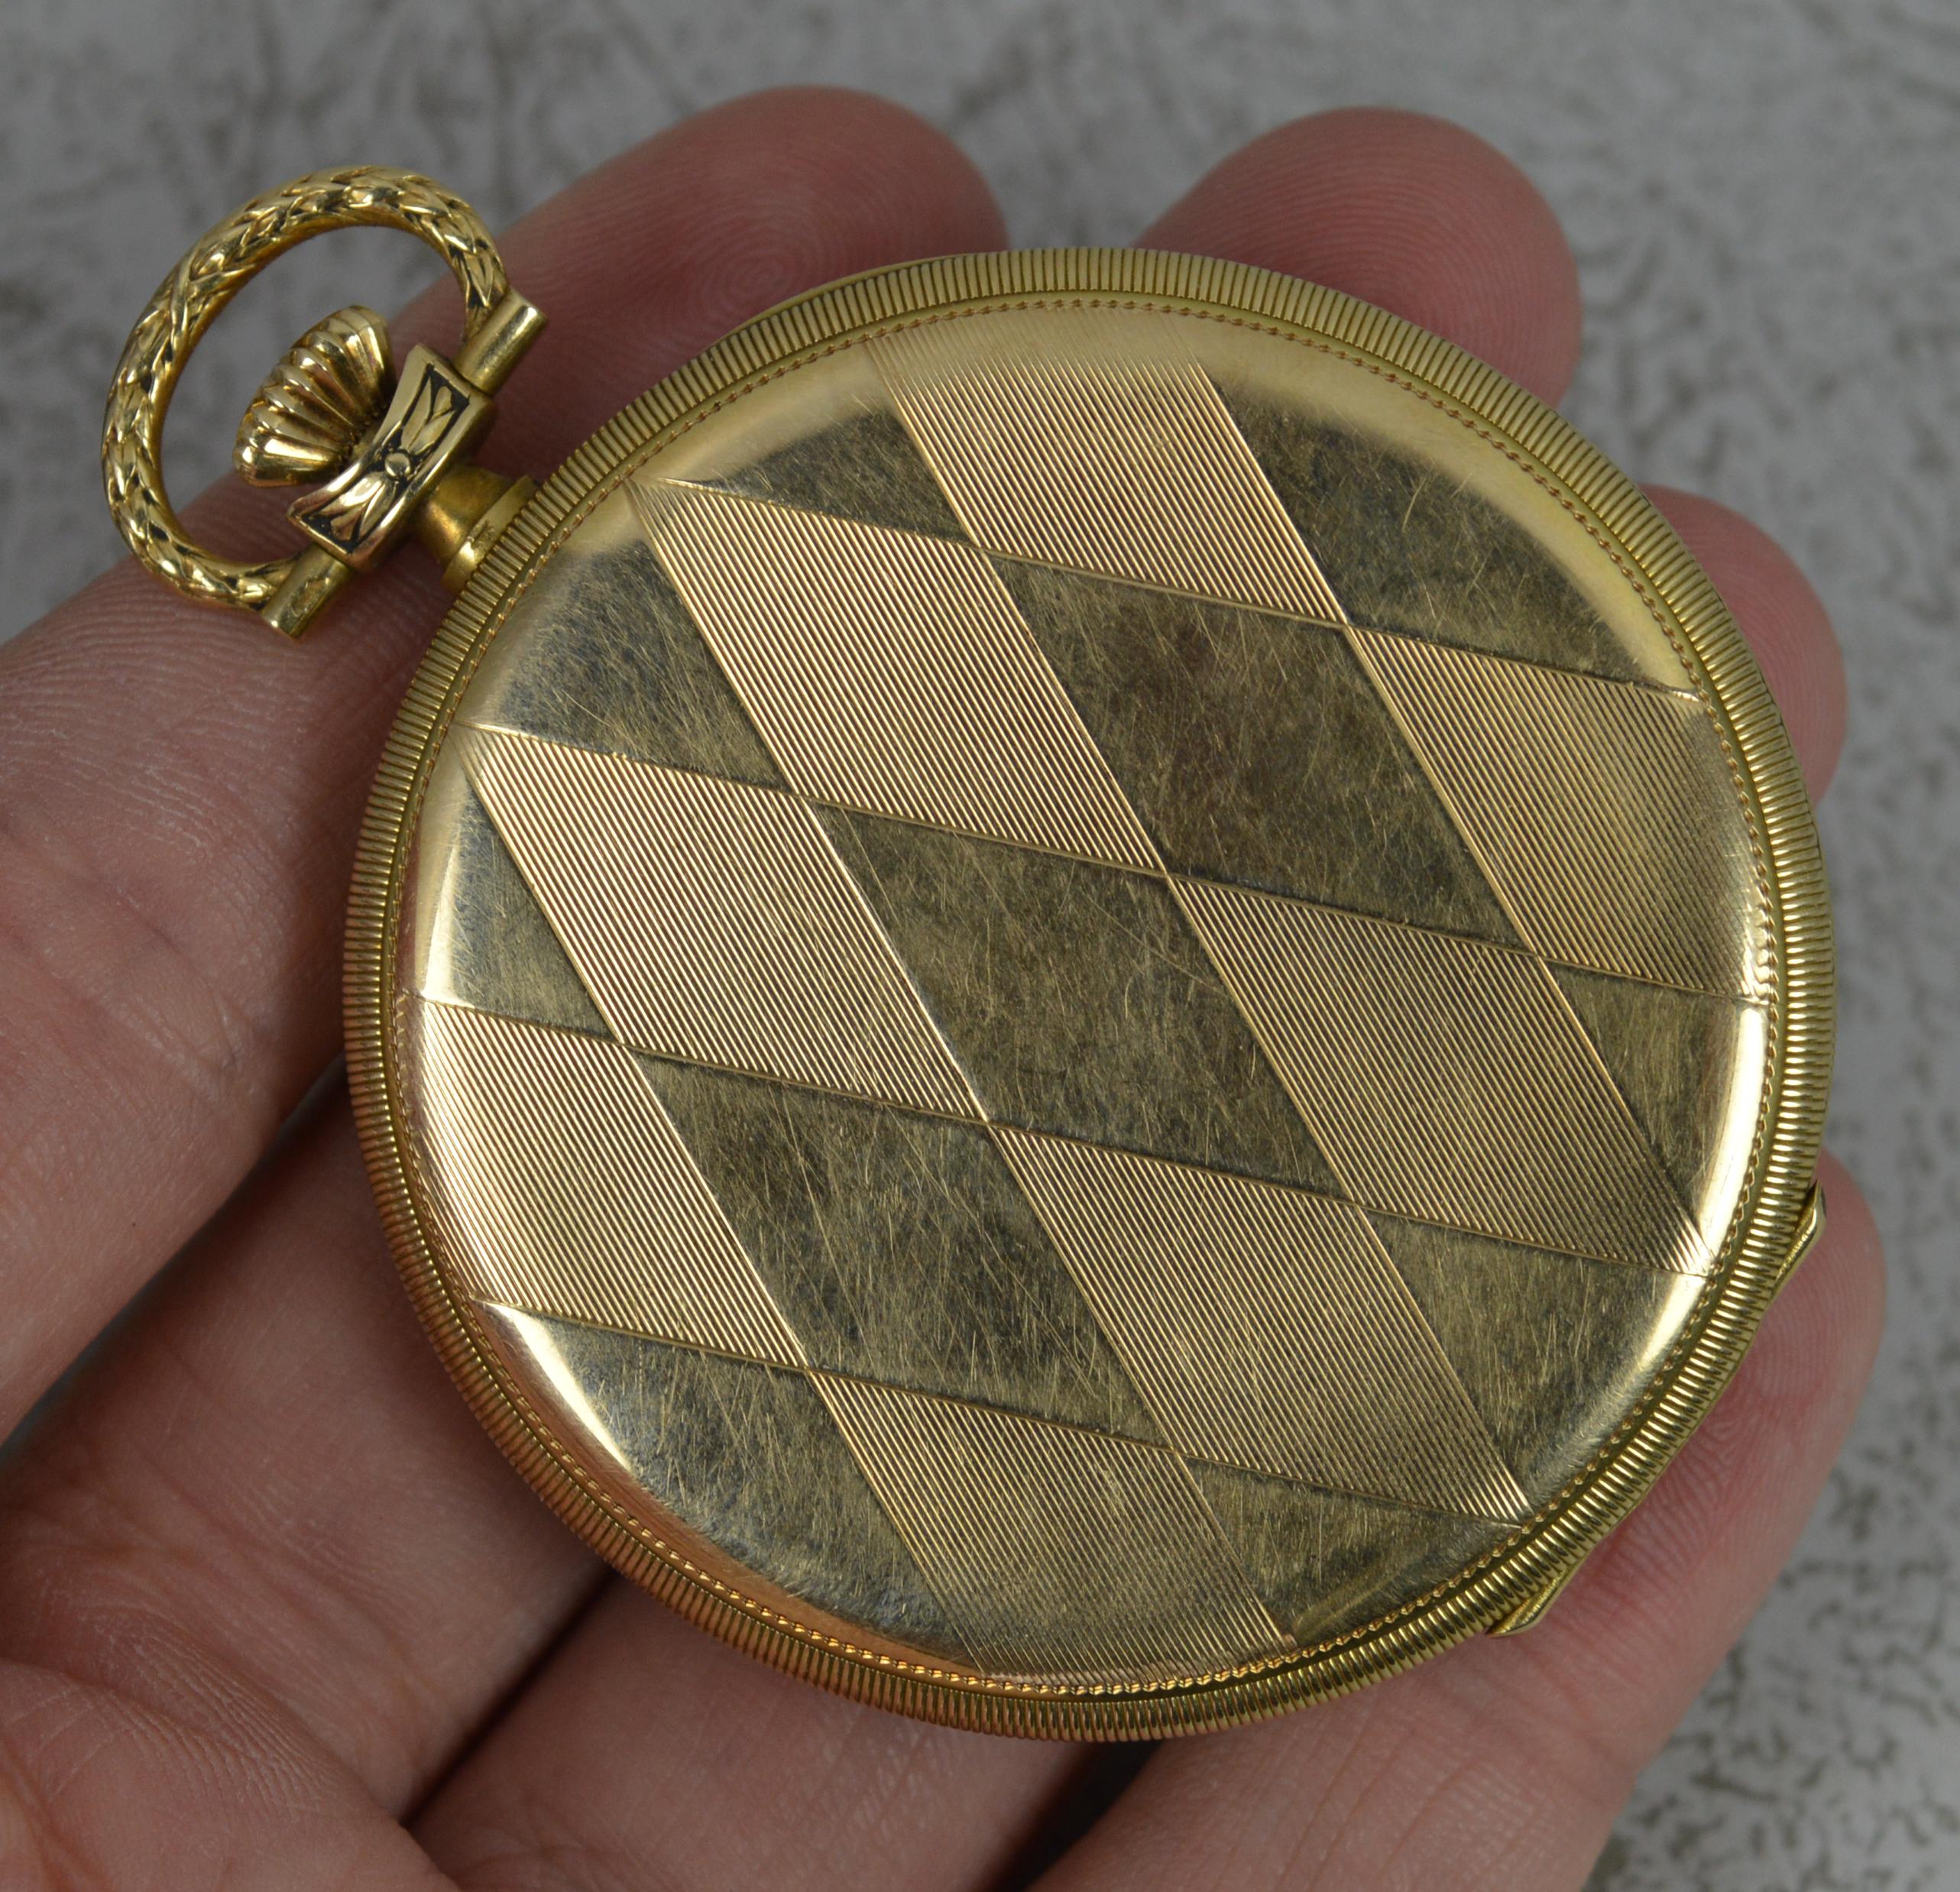 A superb IWC pocket watch. Solid 14 carat yellow gold example. Diamond shaped finish to reverse with plain and engine turned pattern. Attractive leaf like pattern to sides and top. Very clean hand wound mechanism. Art deco period piece.

Condition ;